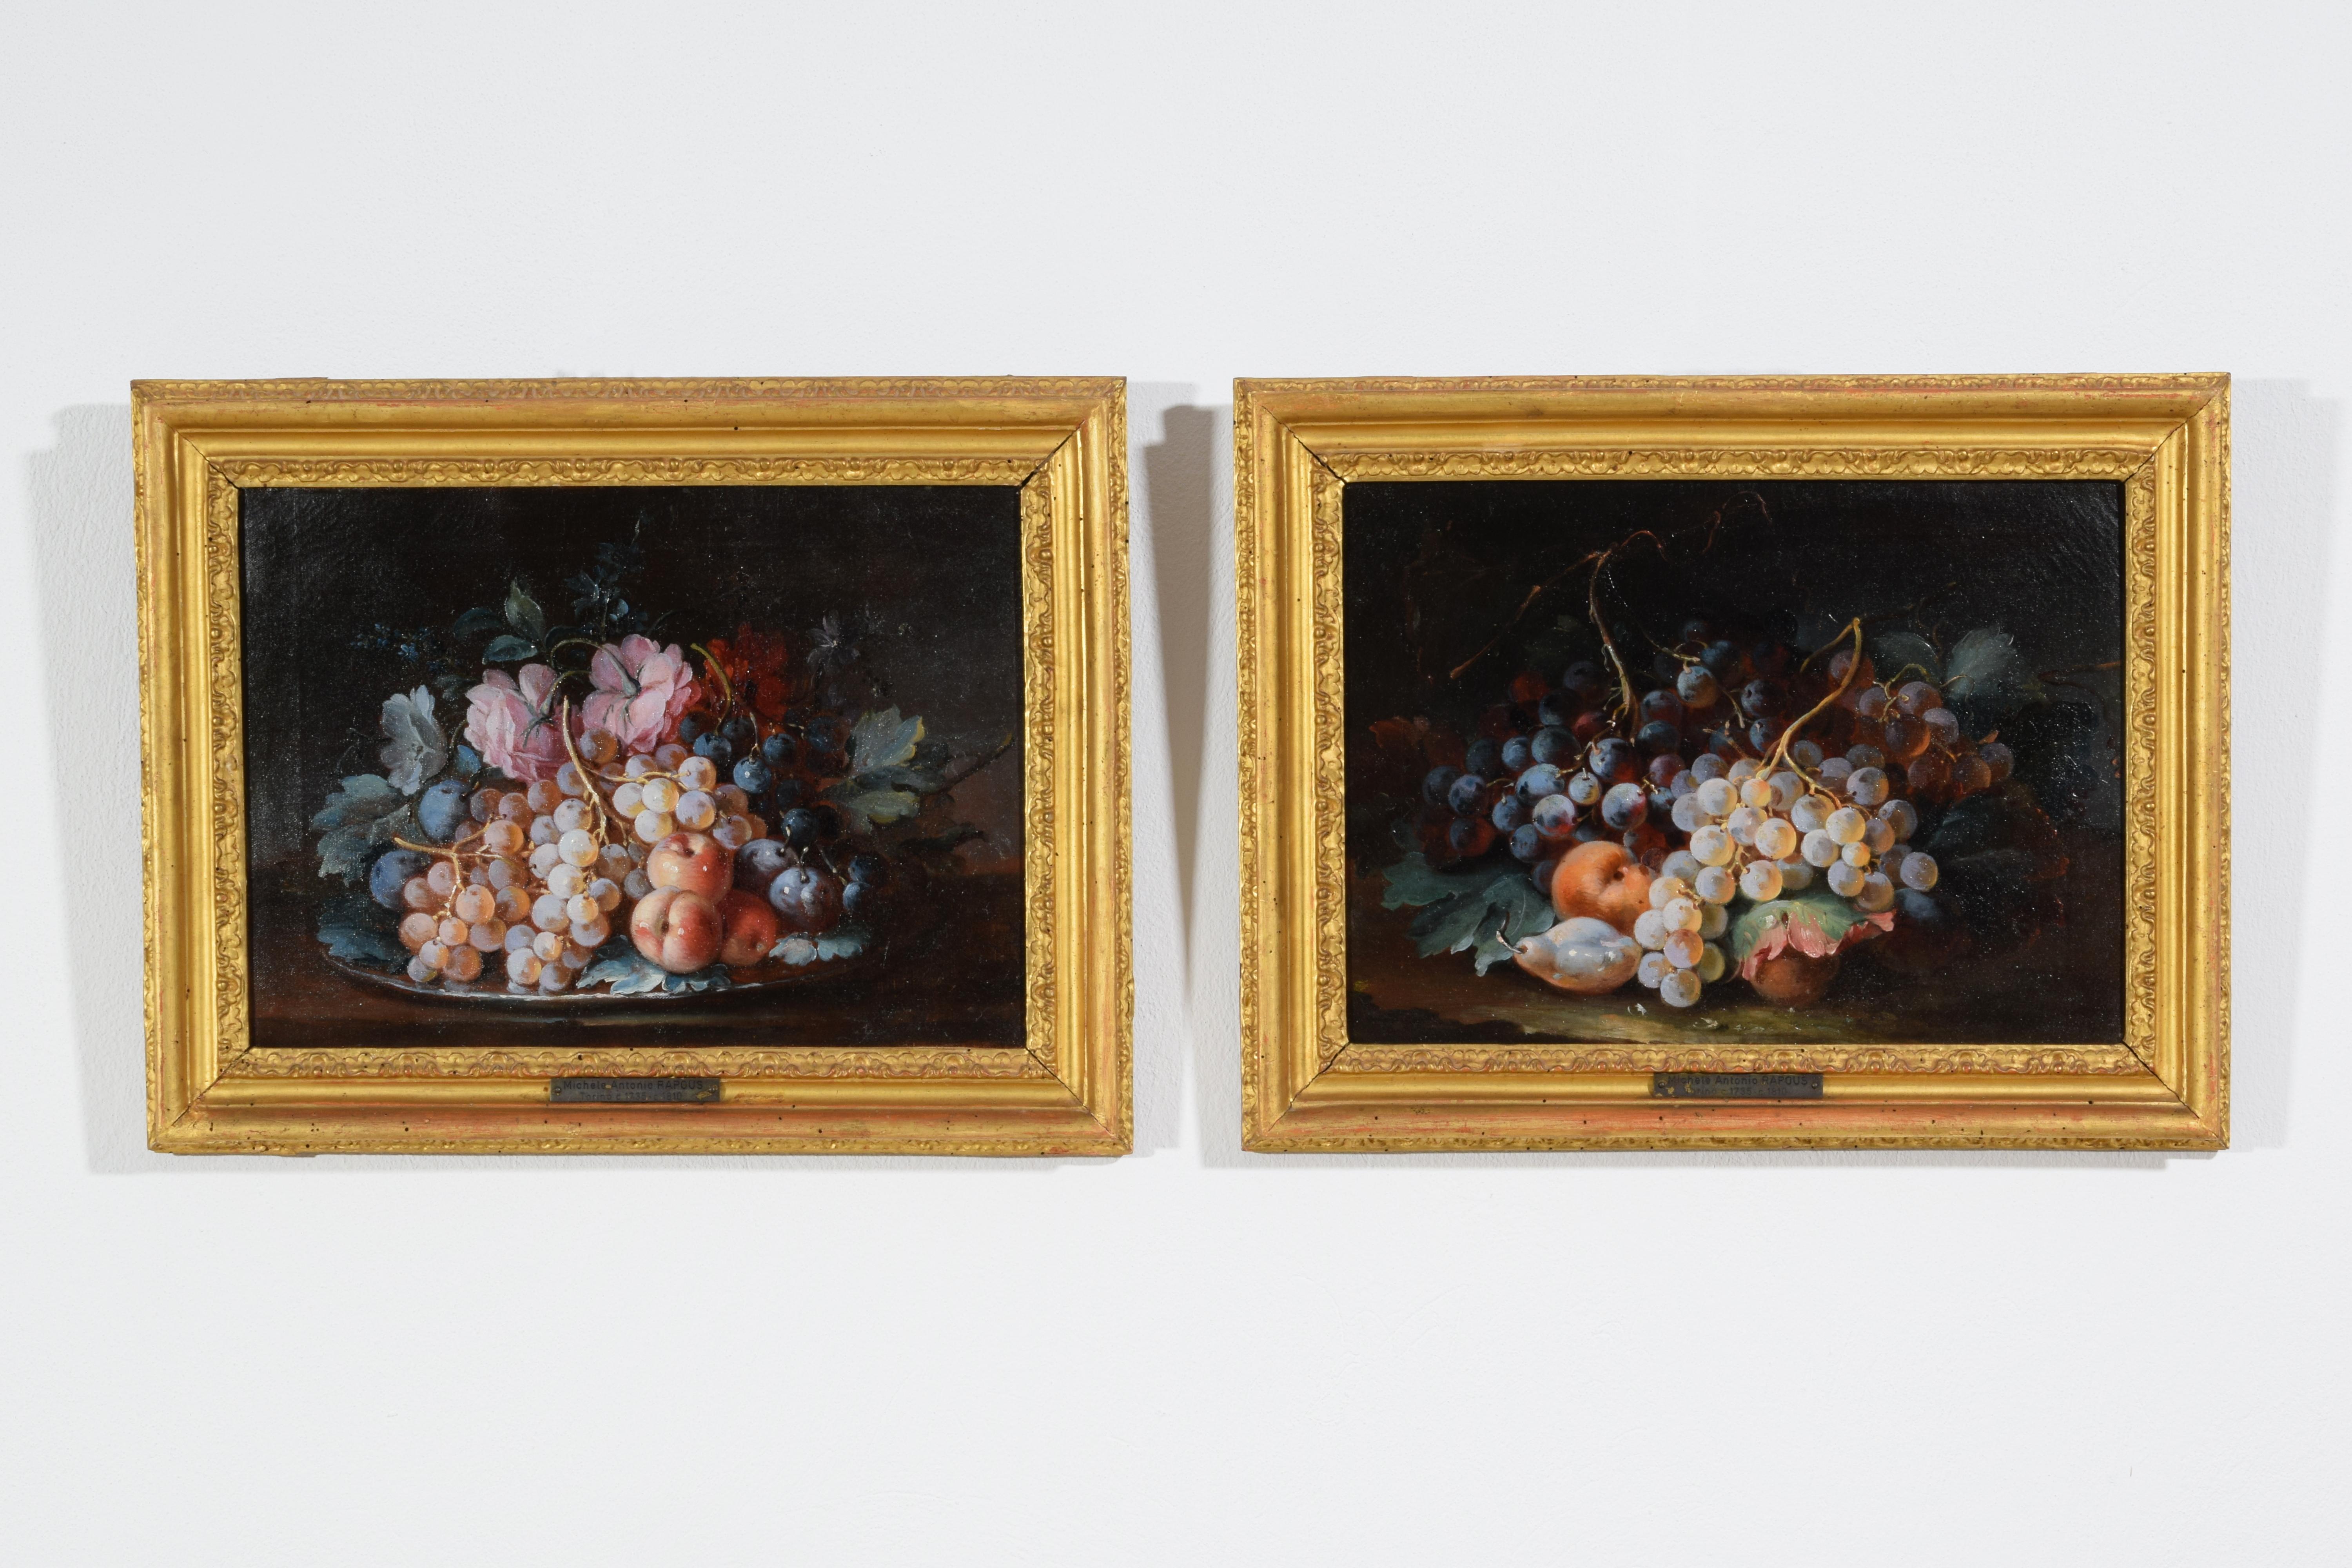 Michele Antonio Rapos (Turin 1733-1819)
Pair of paintings depicting Still Life with fruit composition
Oil on canvas, cm H 27 x L 36; frame cm H 37 x L 46 x P 3 

The two paintings beautiful workmanship depict two still lifes composed of fruit